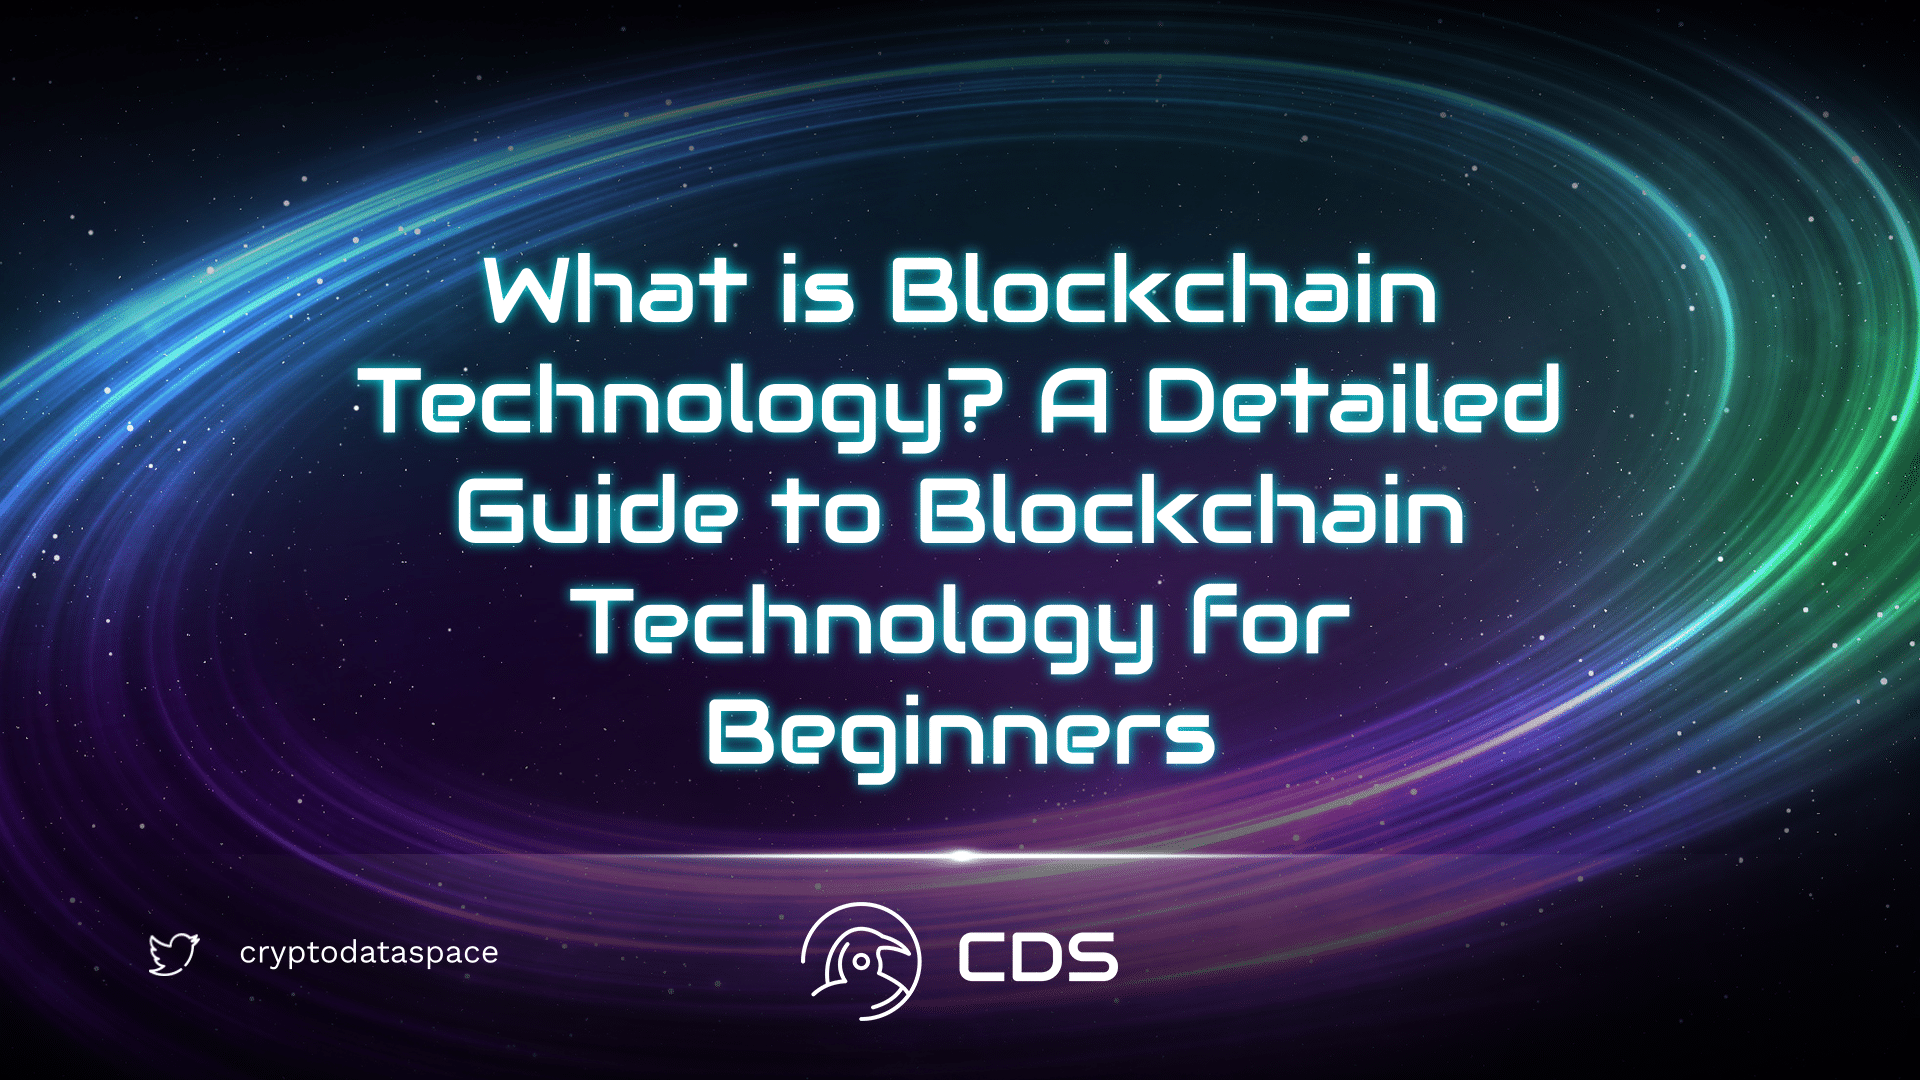 What is Blockchain Technology? A Detailed Guide to Blockchain Technology for Beginners